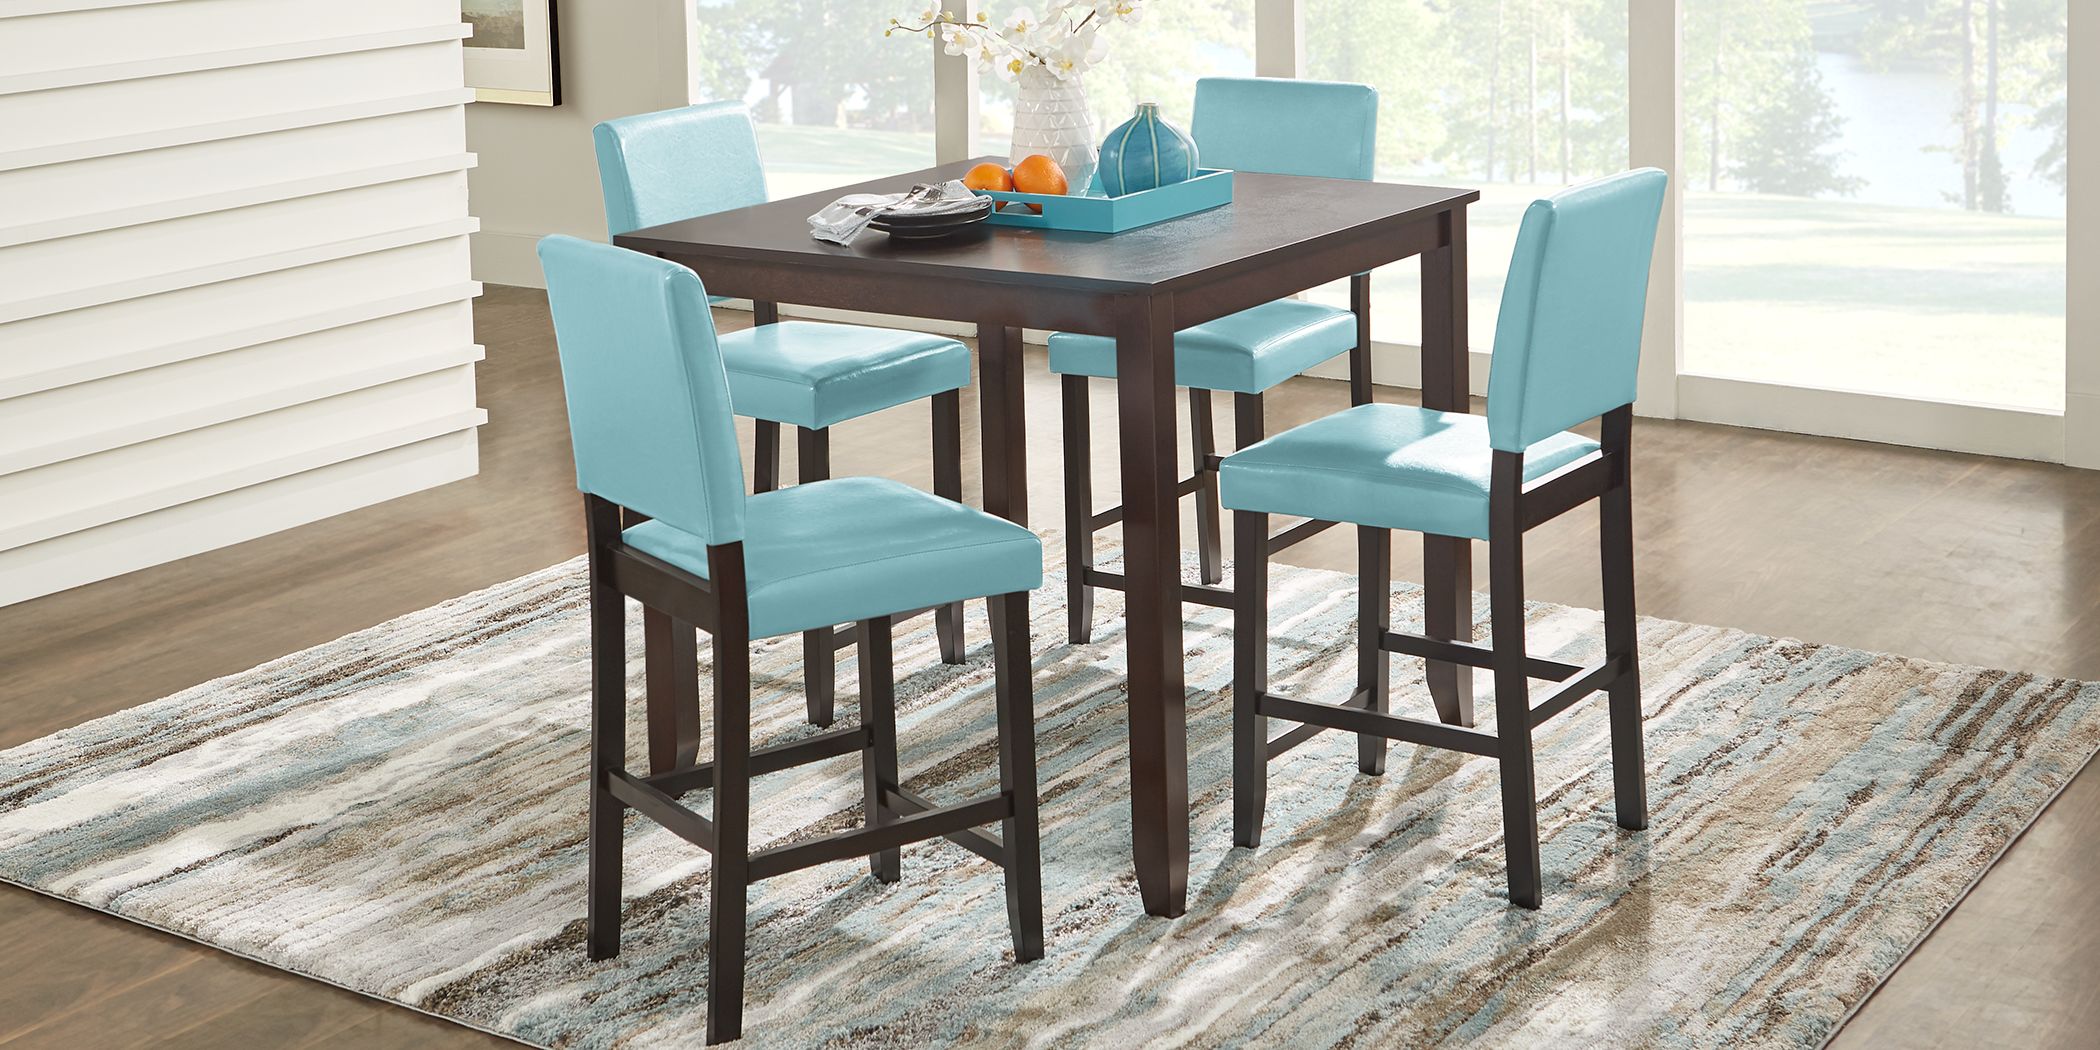 Blue Dining Room Table Sets, Blue Kitchen Table And Chairs Set